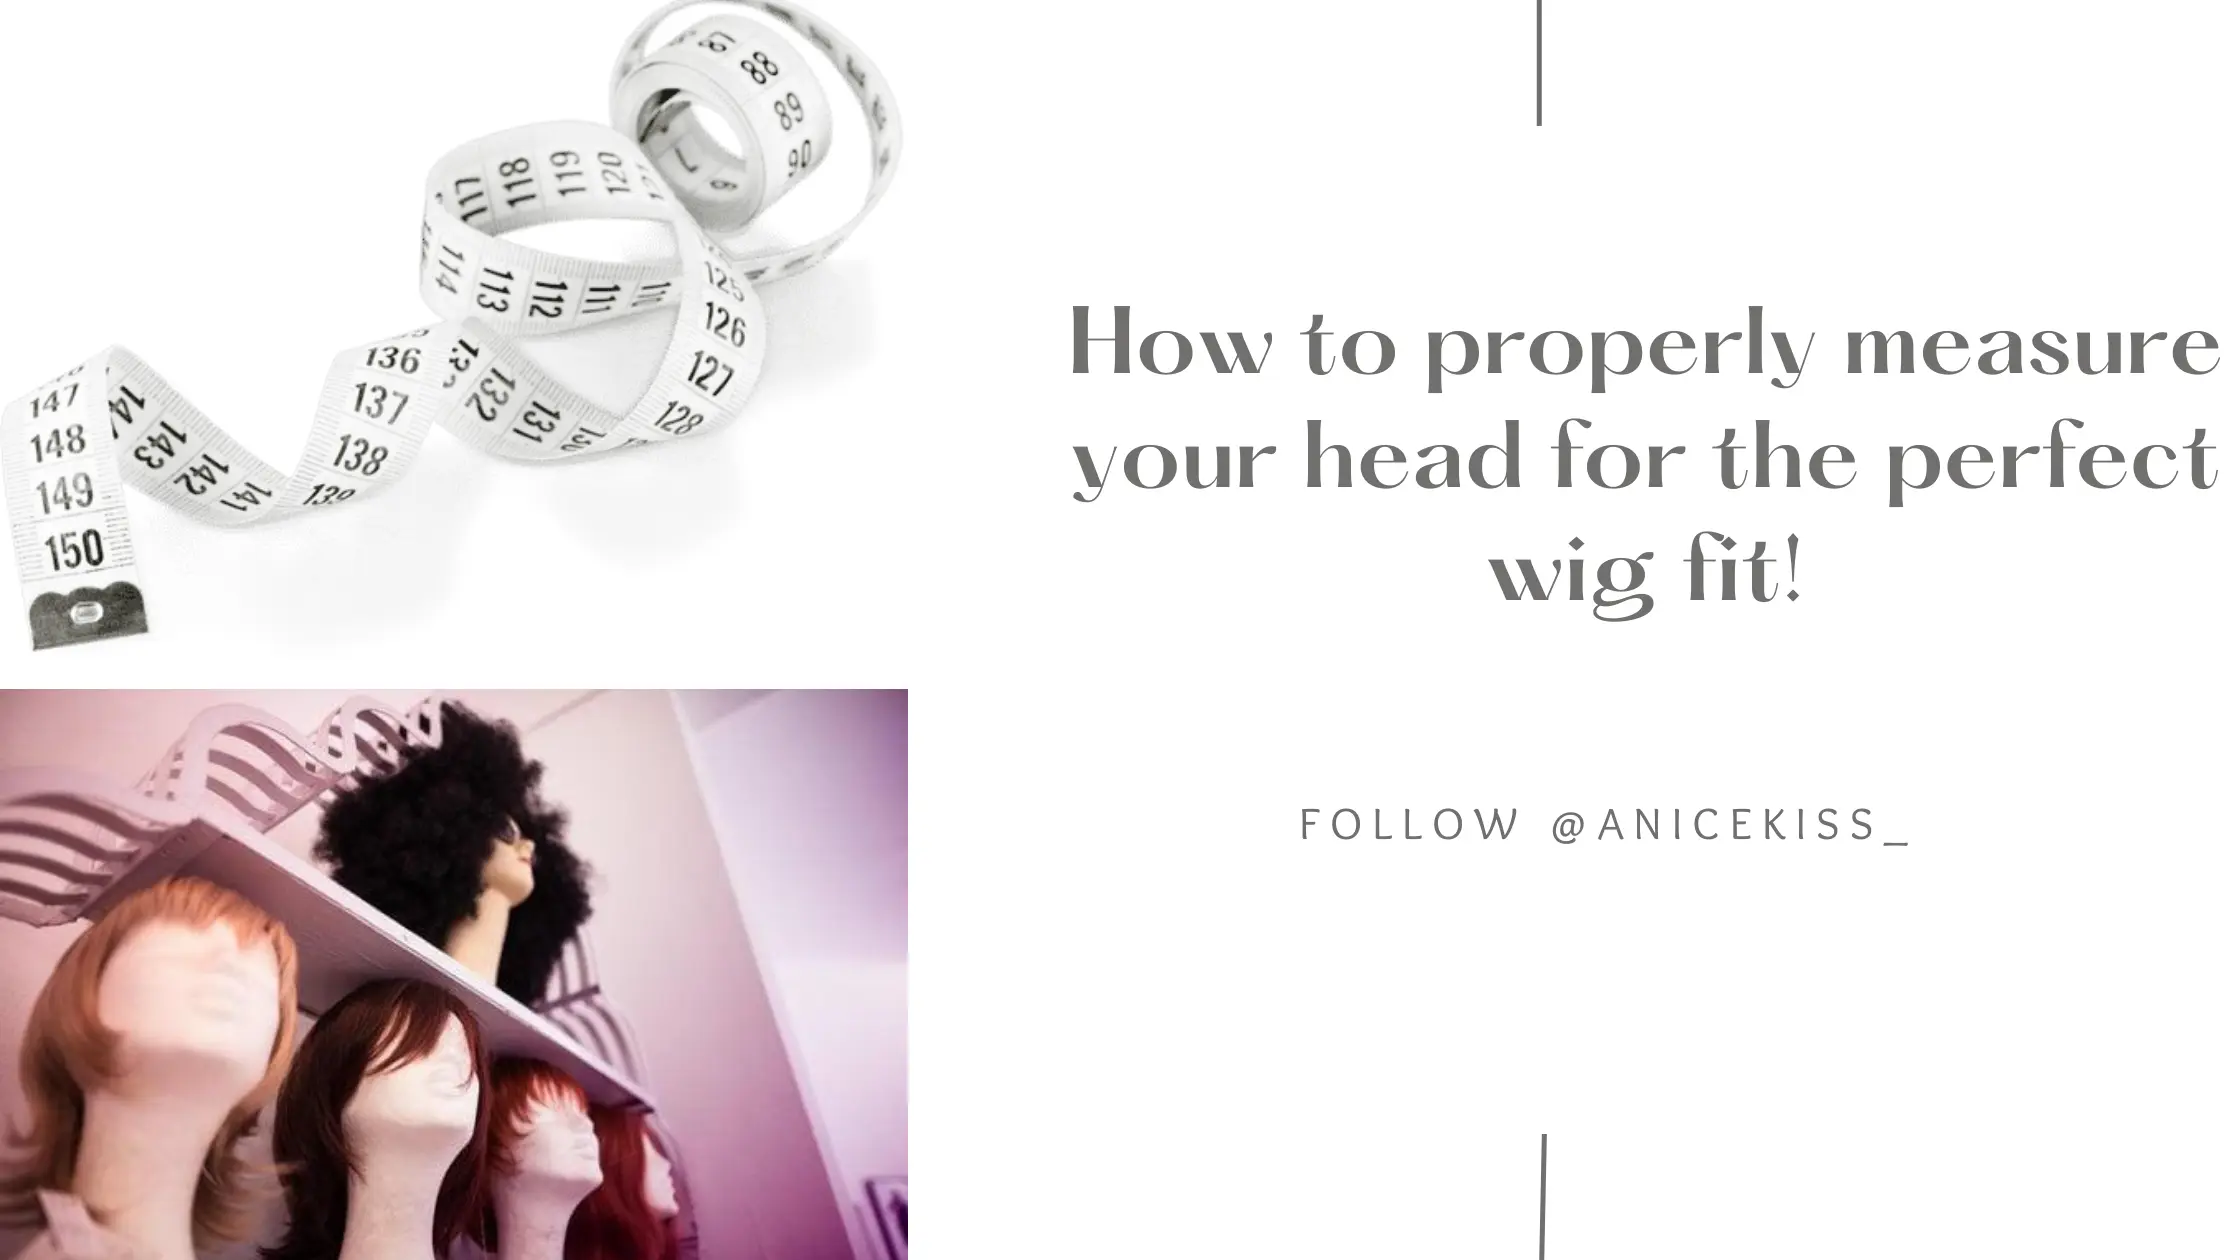 How to properly measure your head for the perfect wig fit